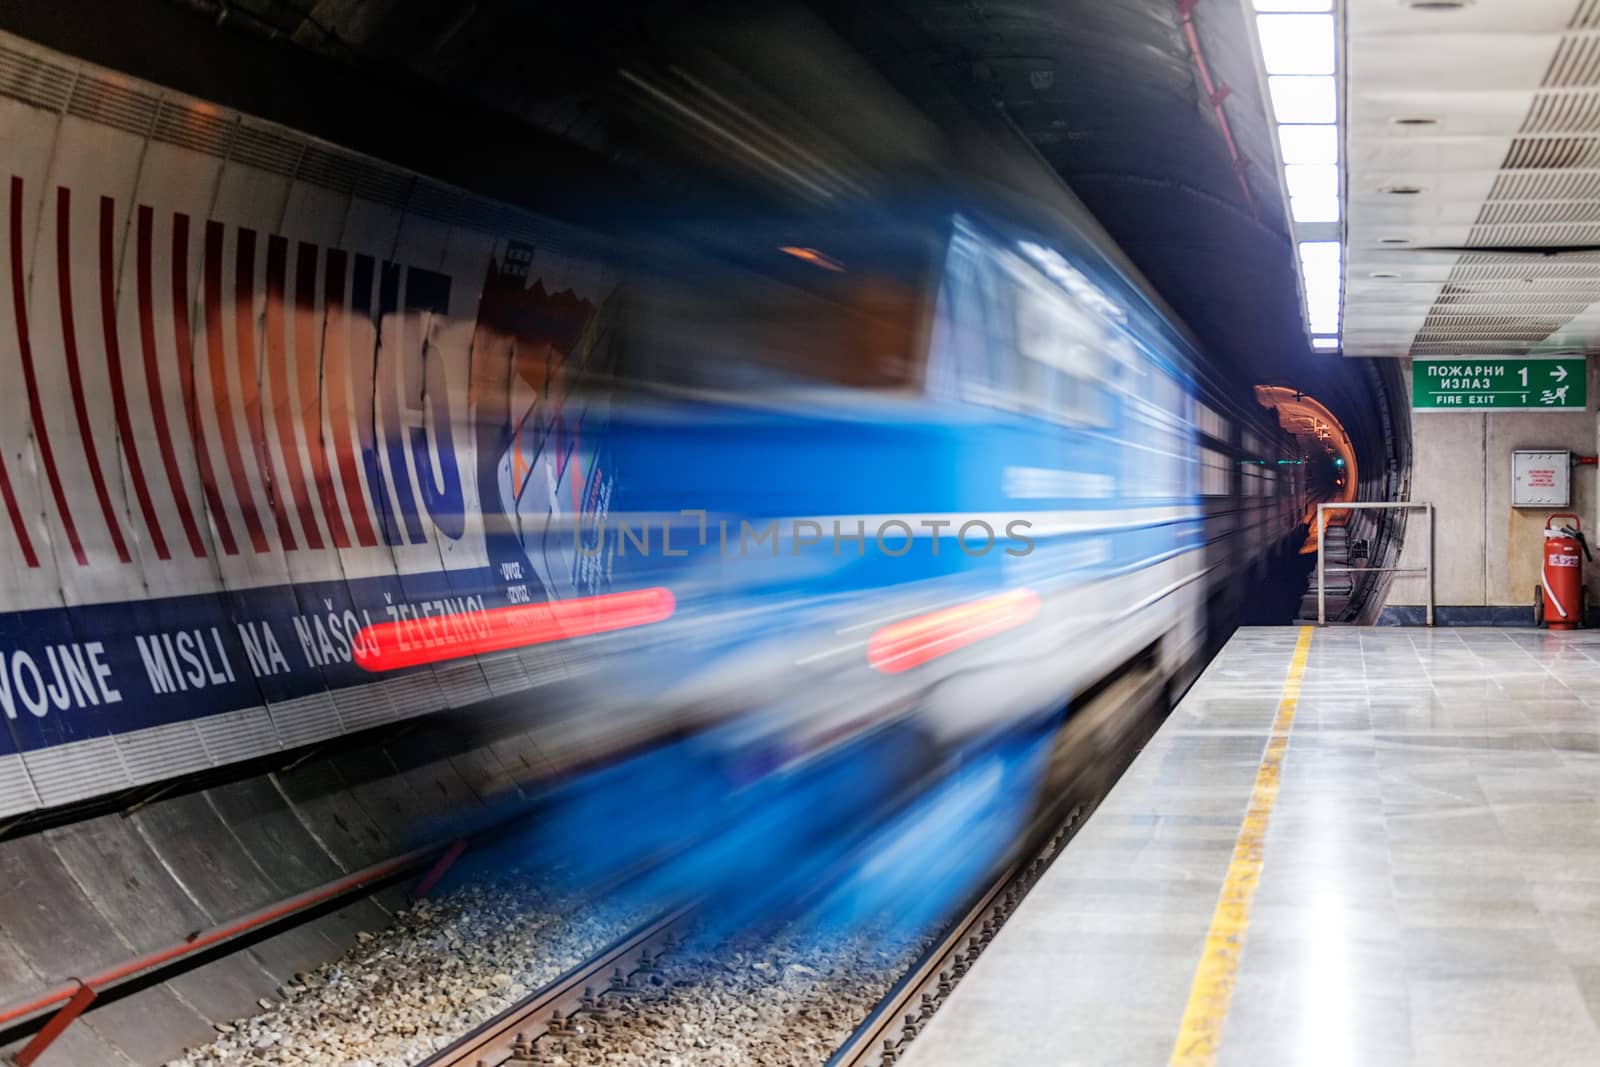 Fast moving blurred train entering train station